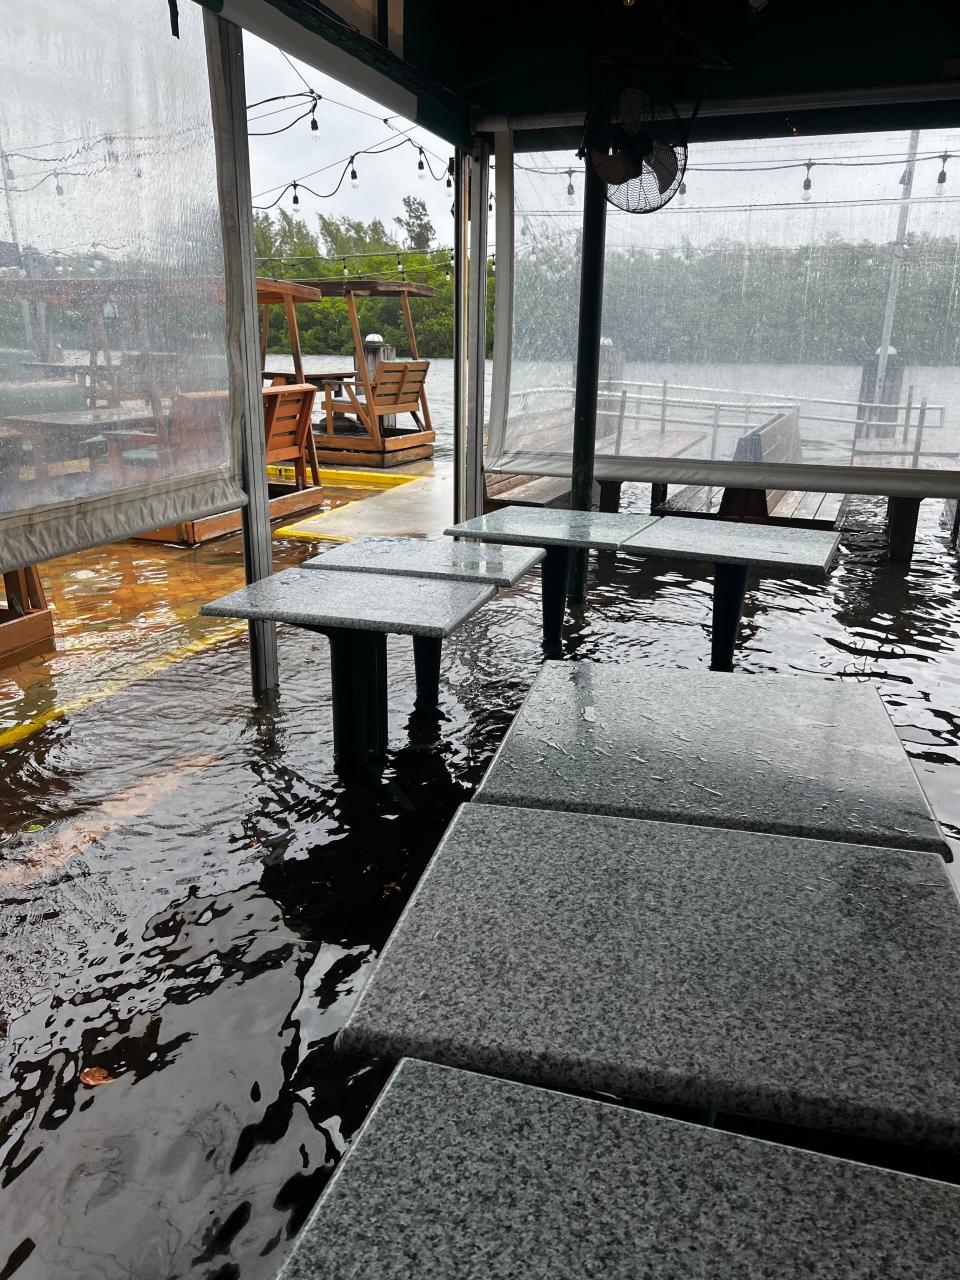 Significant flooding occurred inside Two Georges restaurant in Boynton Beach from a combination of a king tide, full moon and Hurricane Nicole.